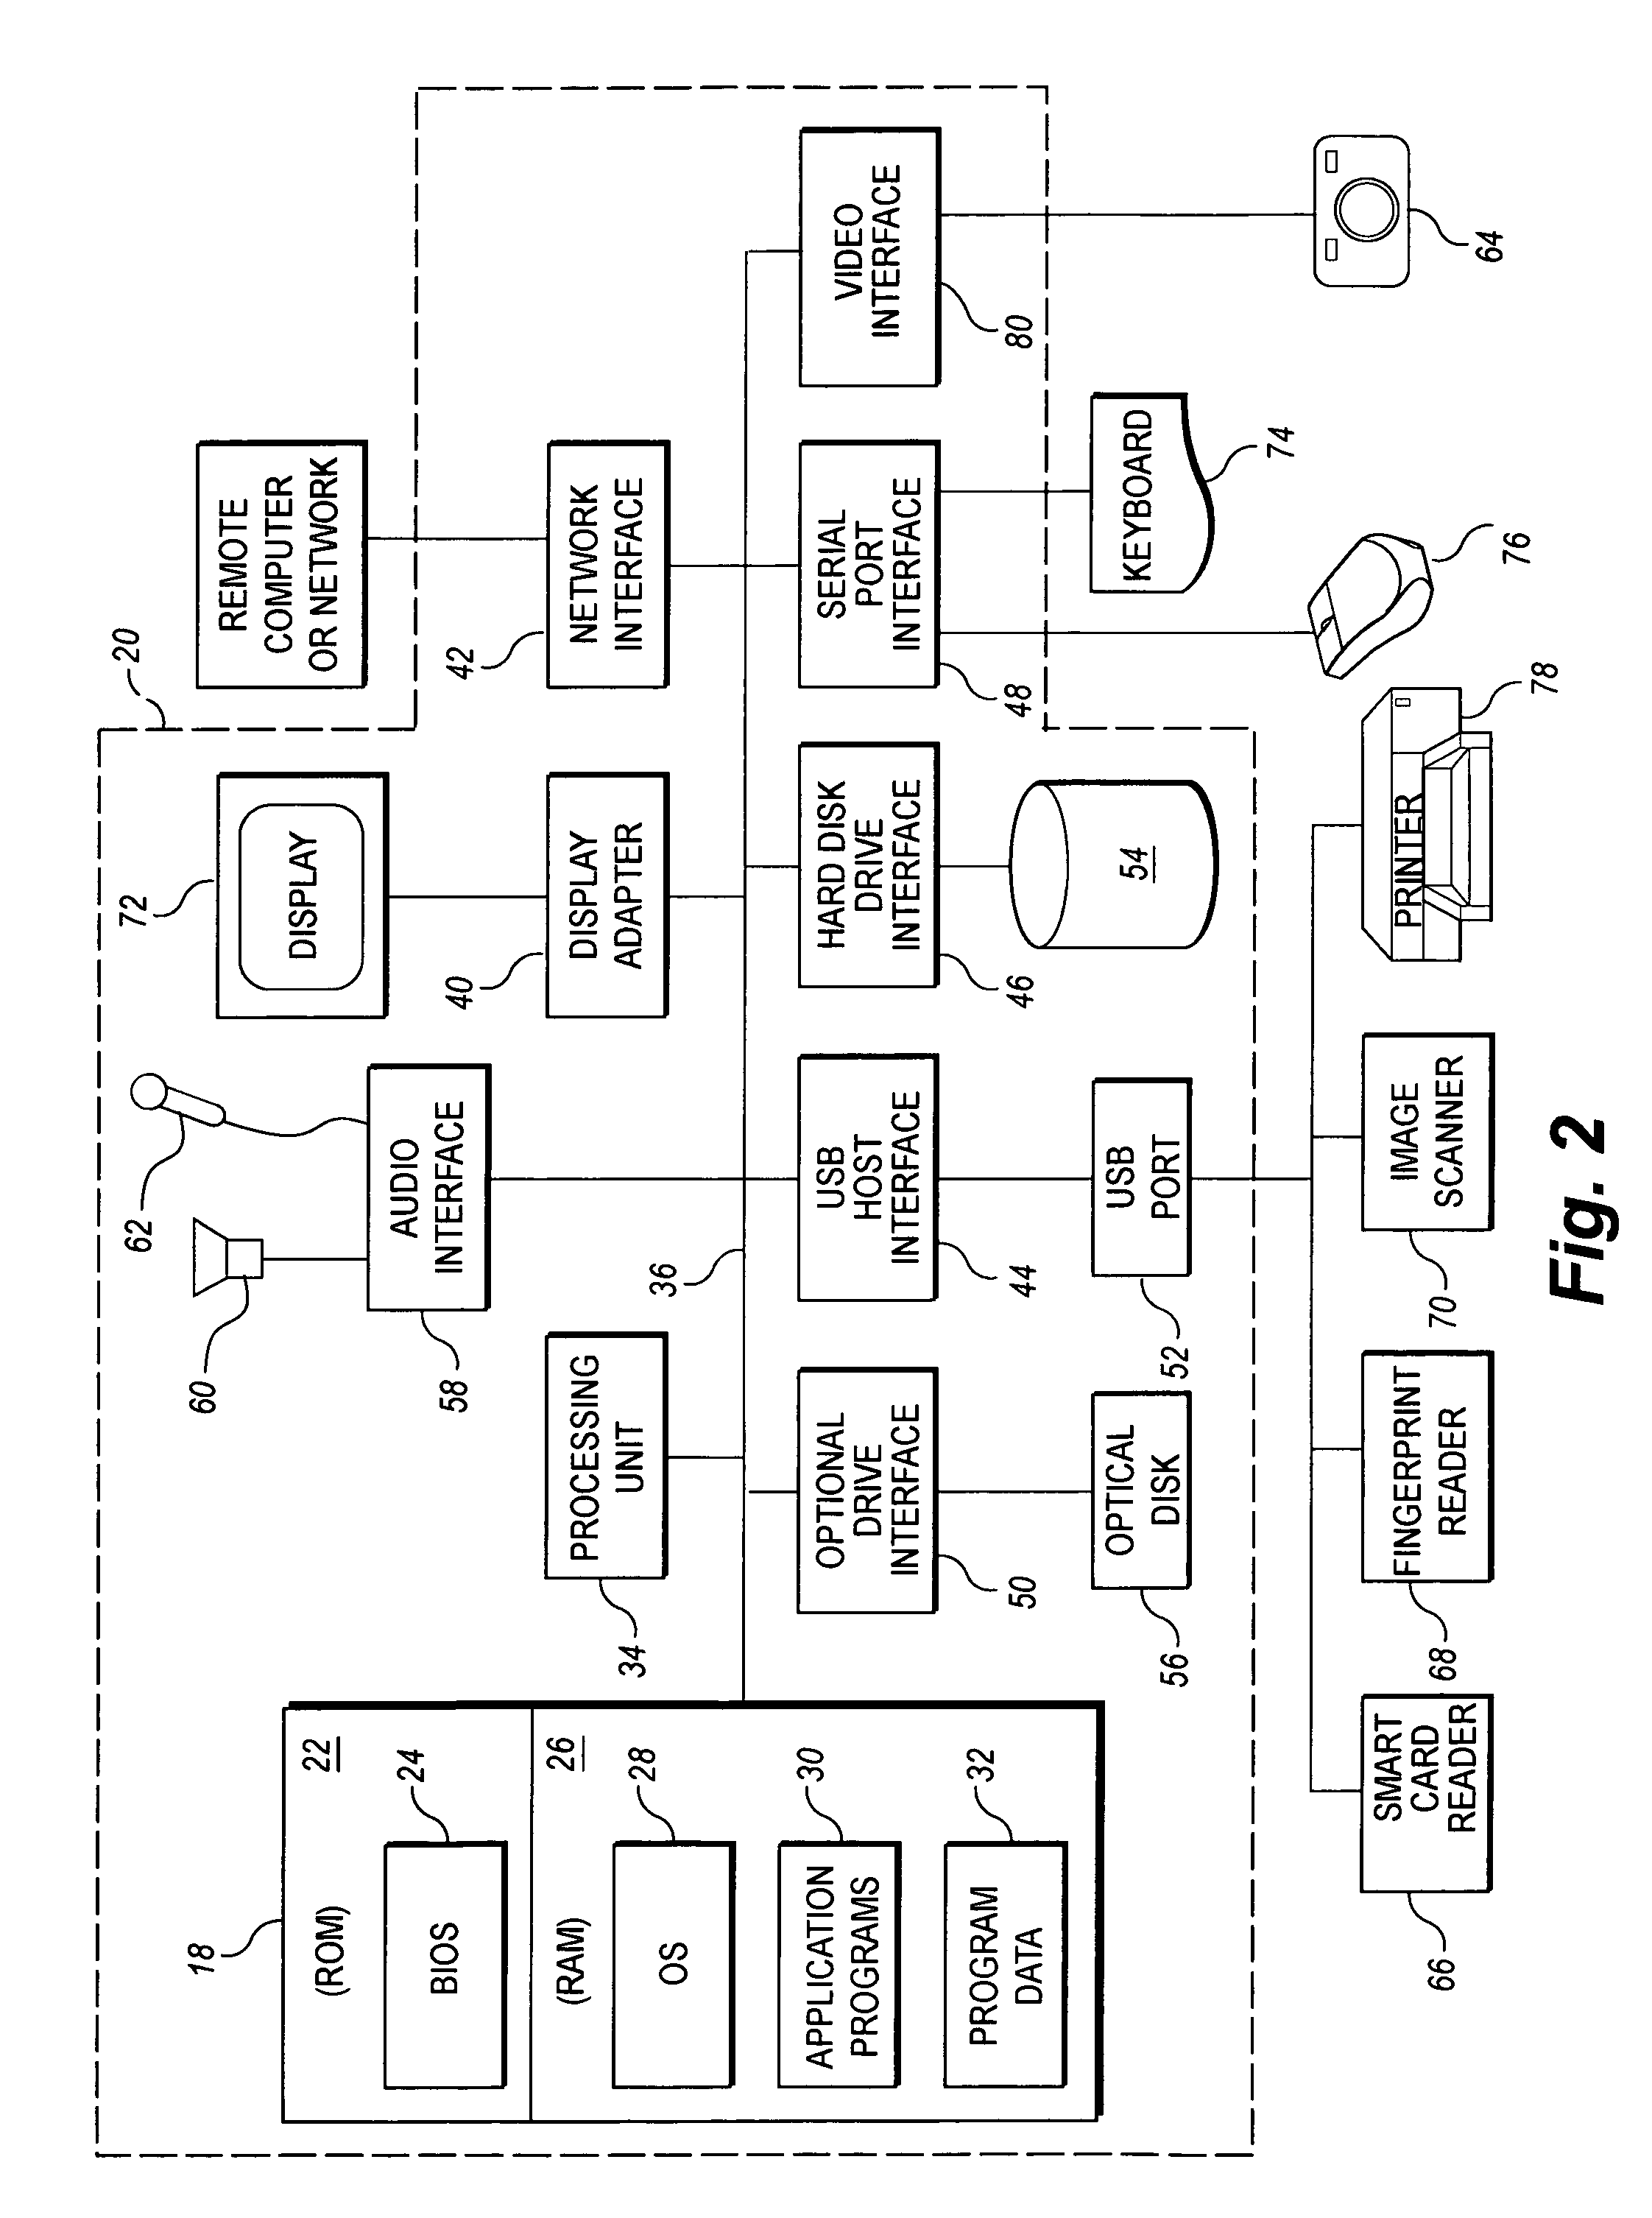 Psycho/physiological deception detection system and method for controlled substance surveillance